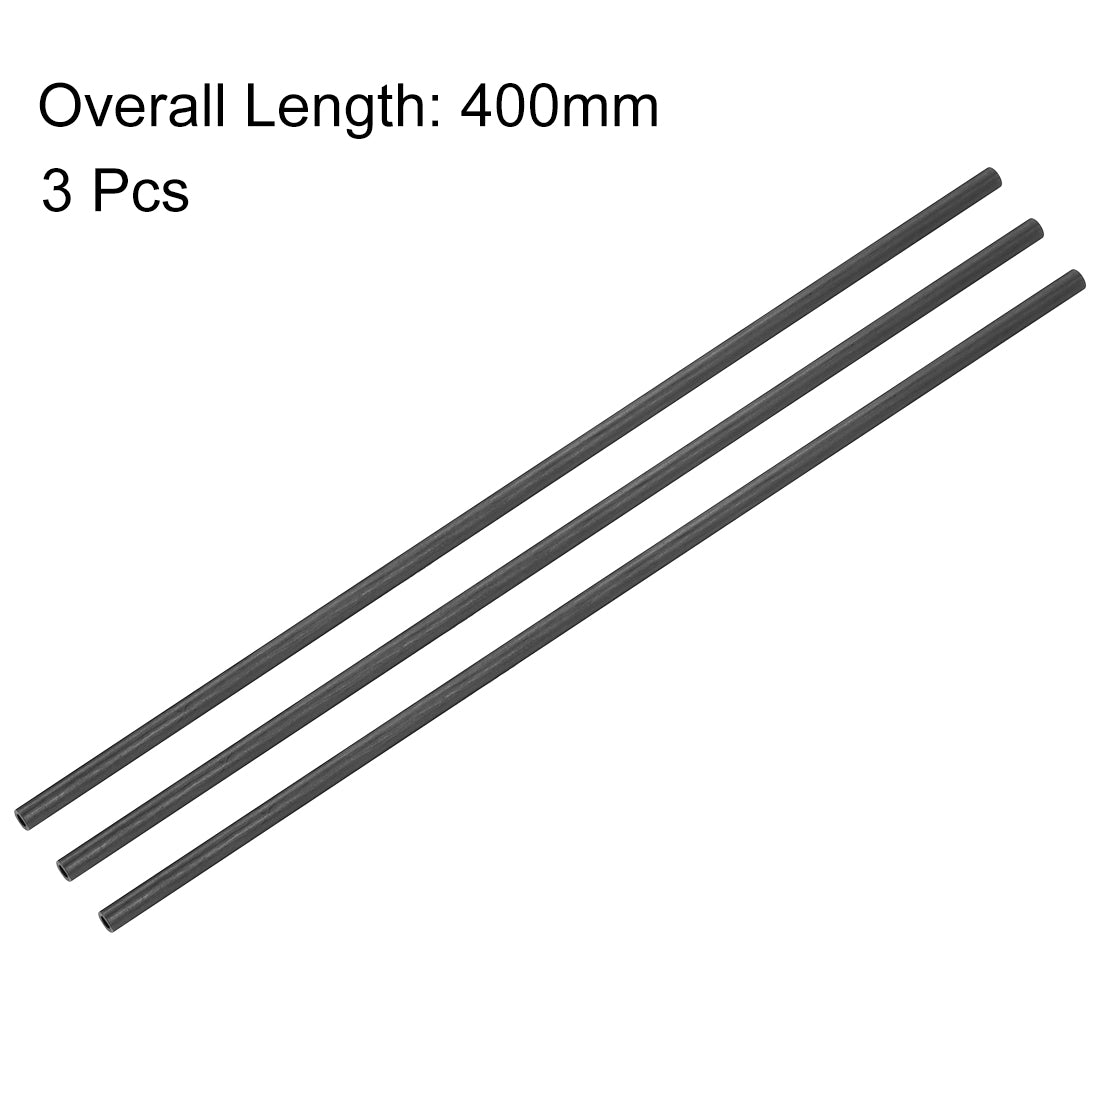 uxcell Uxcell Carbon Fiber Round Tube 4mm x 3mm x 400mm Carbon Fiber Wing Pultrusion Tubing for RC Airplane Quadcopter 3 Pcs